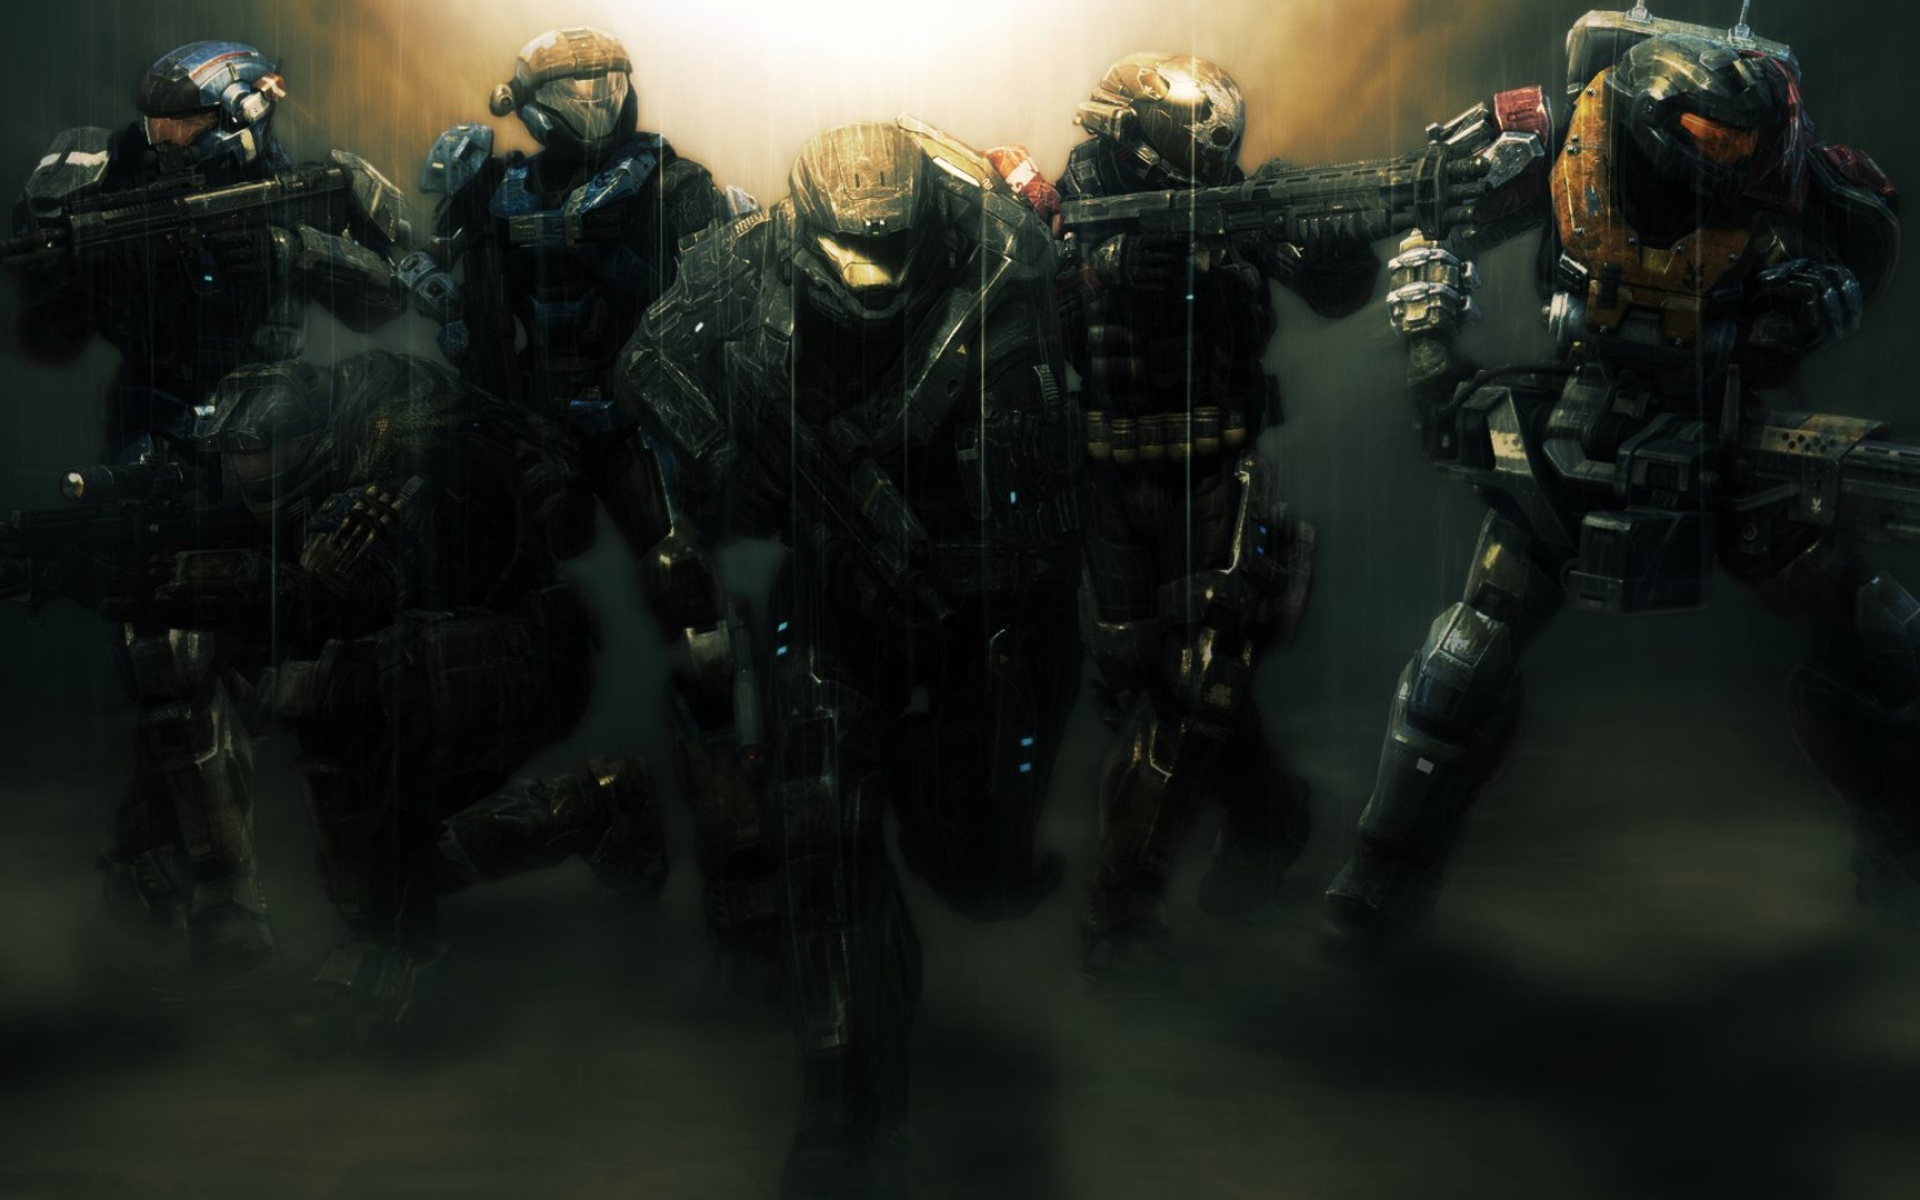 Halo: Reach gaming, Intense firefight, Noble Team, Military campaign, 1920x1200 HD Desktop